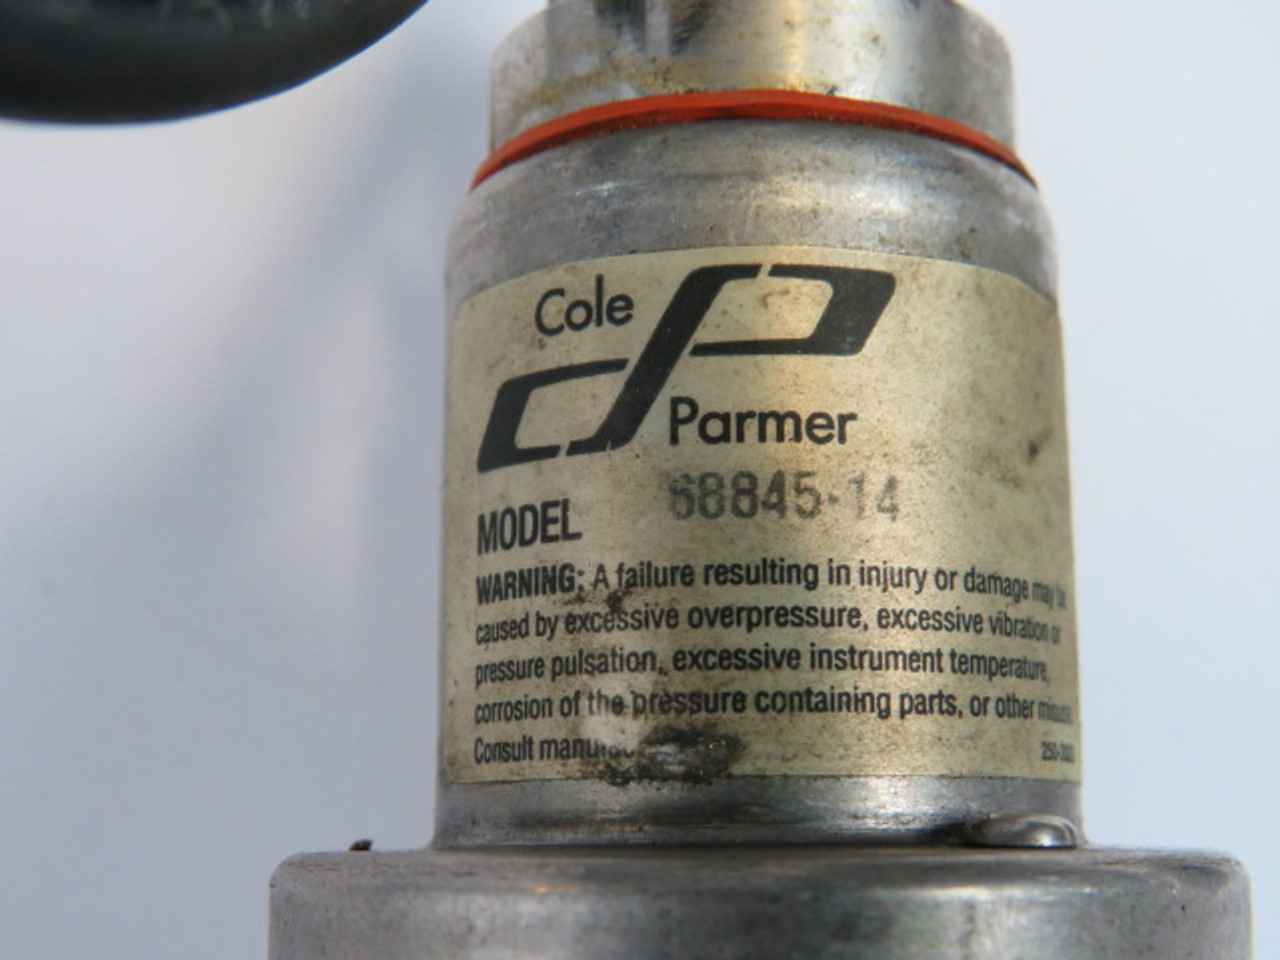 Cole-Parmer 68845-14 Industrial Transmitter 100PSIG 10-30VDC 4-20mA USED